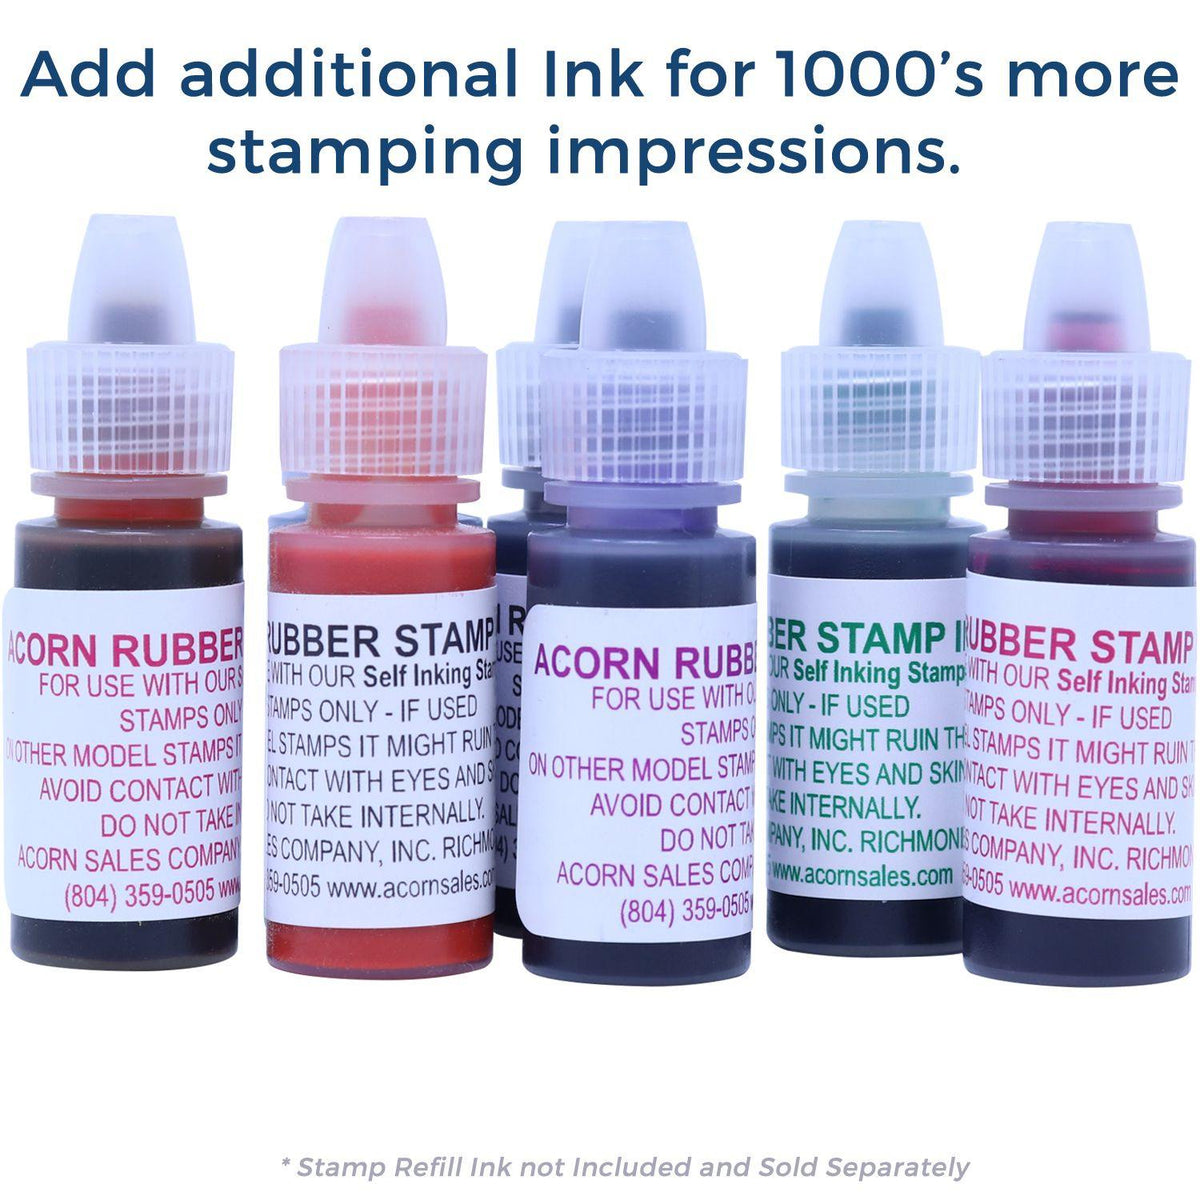 Refill Inks for Large Pre-Inked Fax Stamp Stamp Available